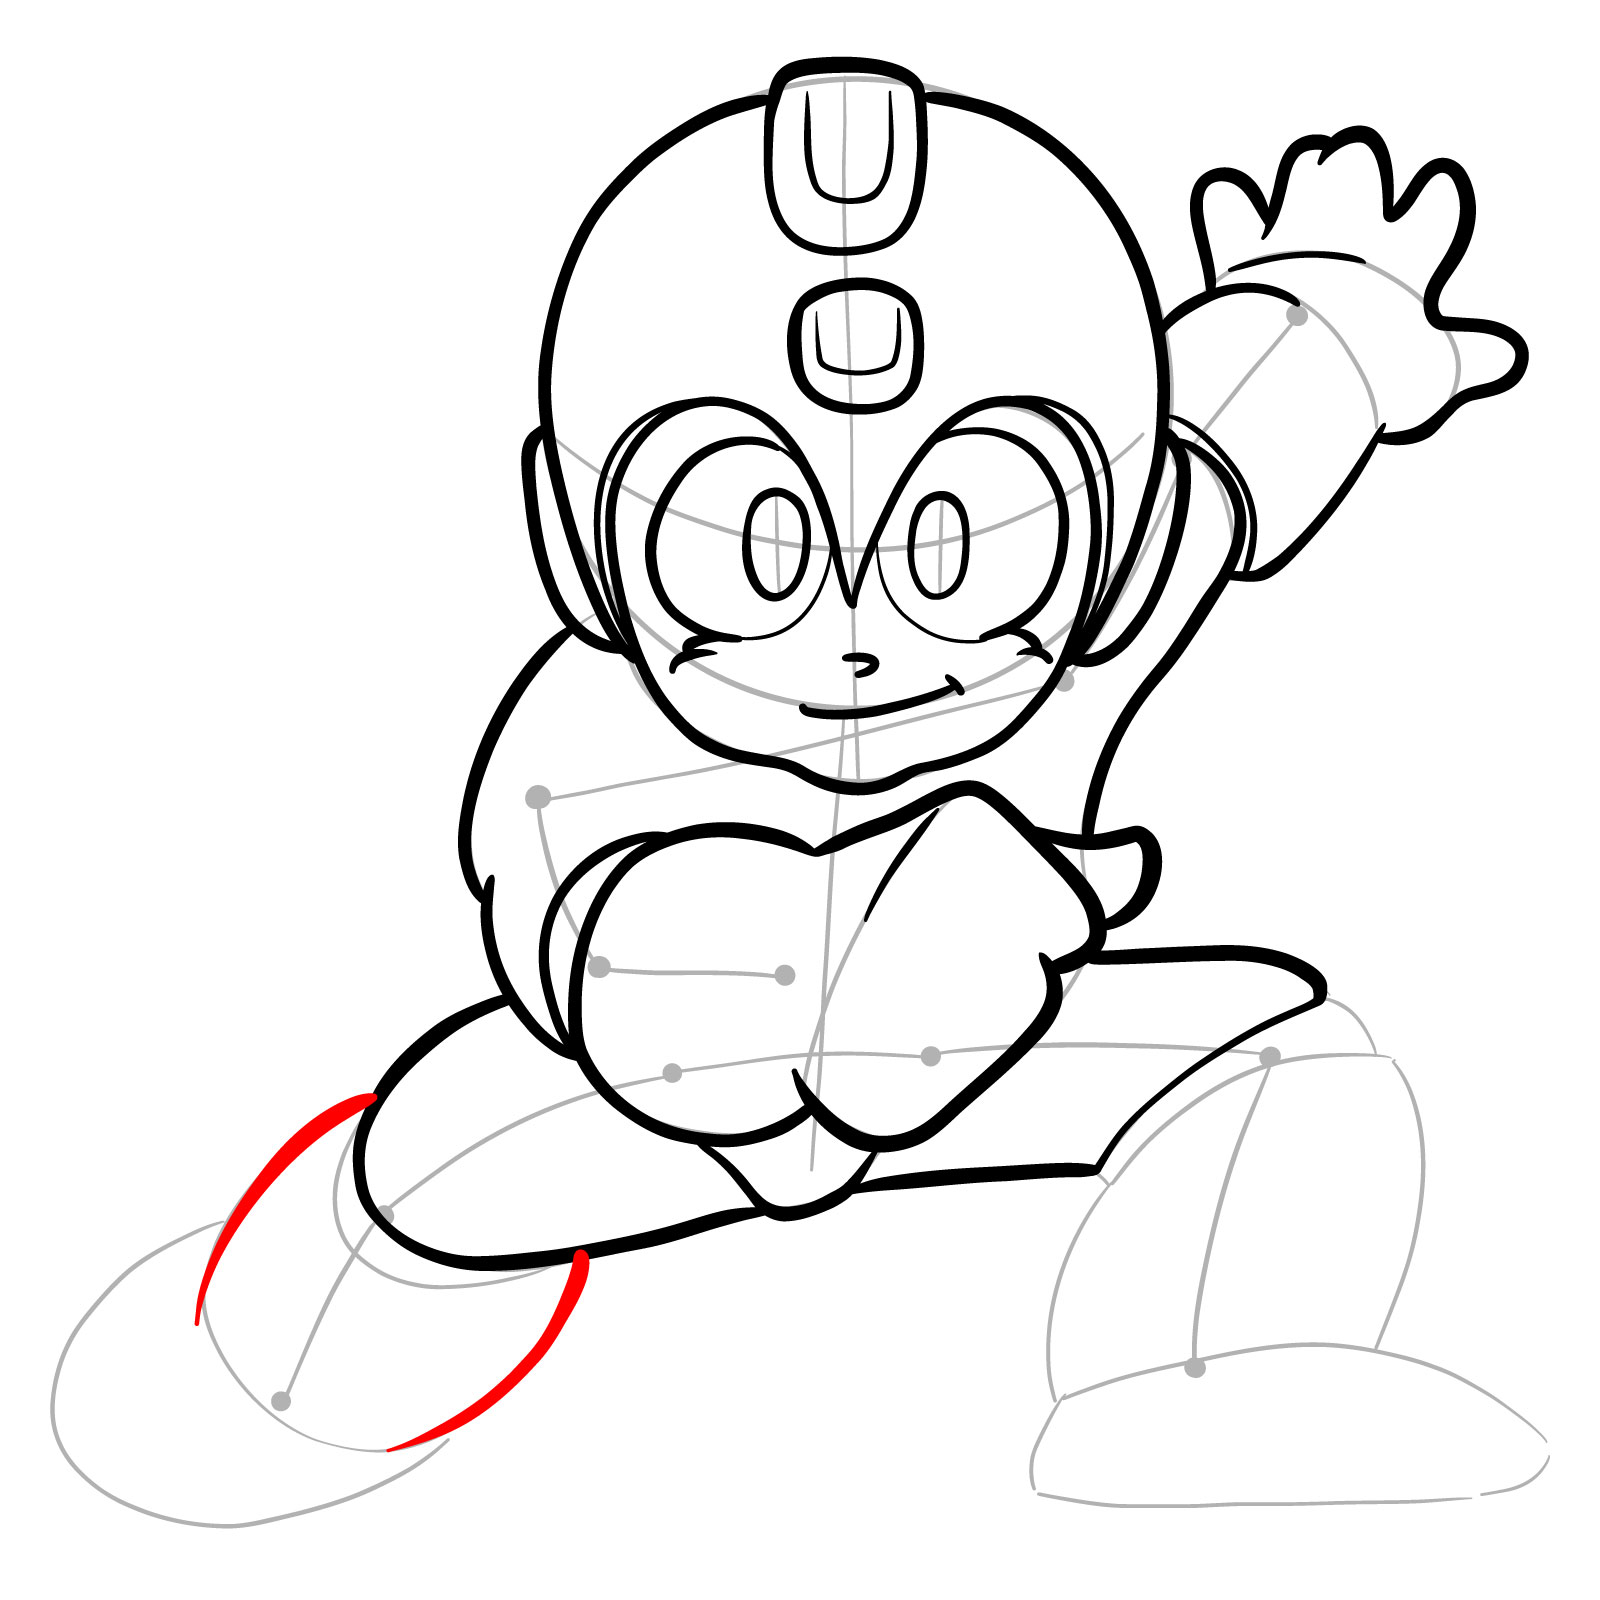 How to draw Mega Man from the original game - step 21